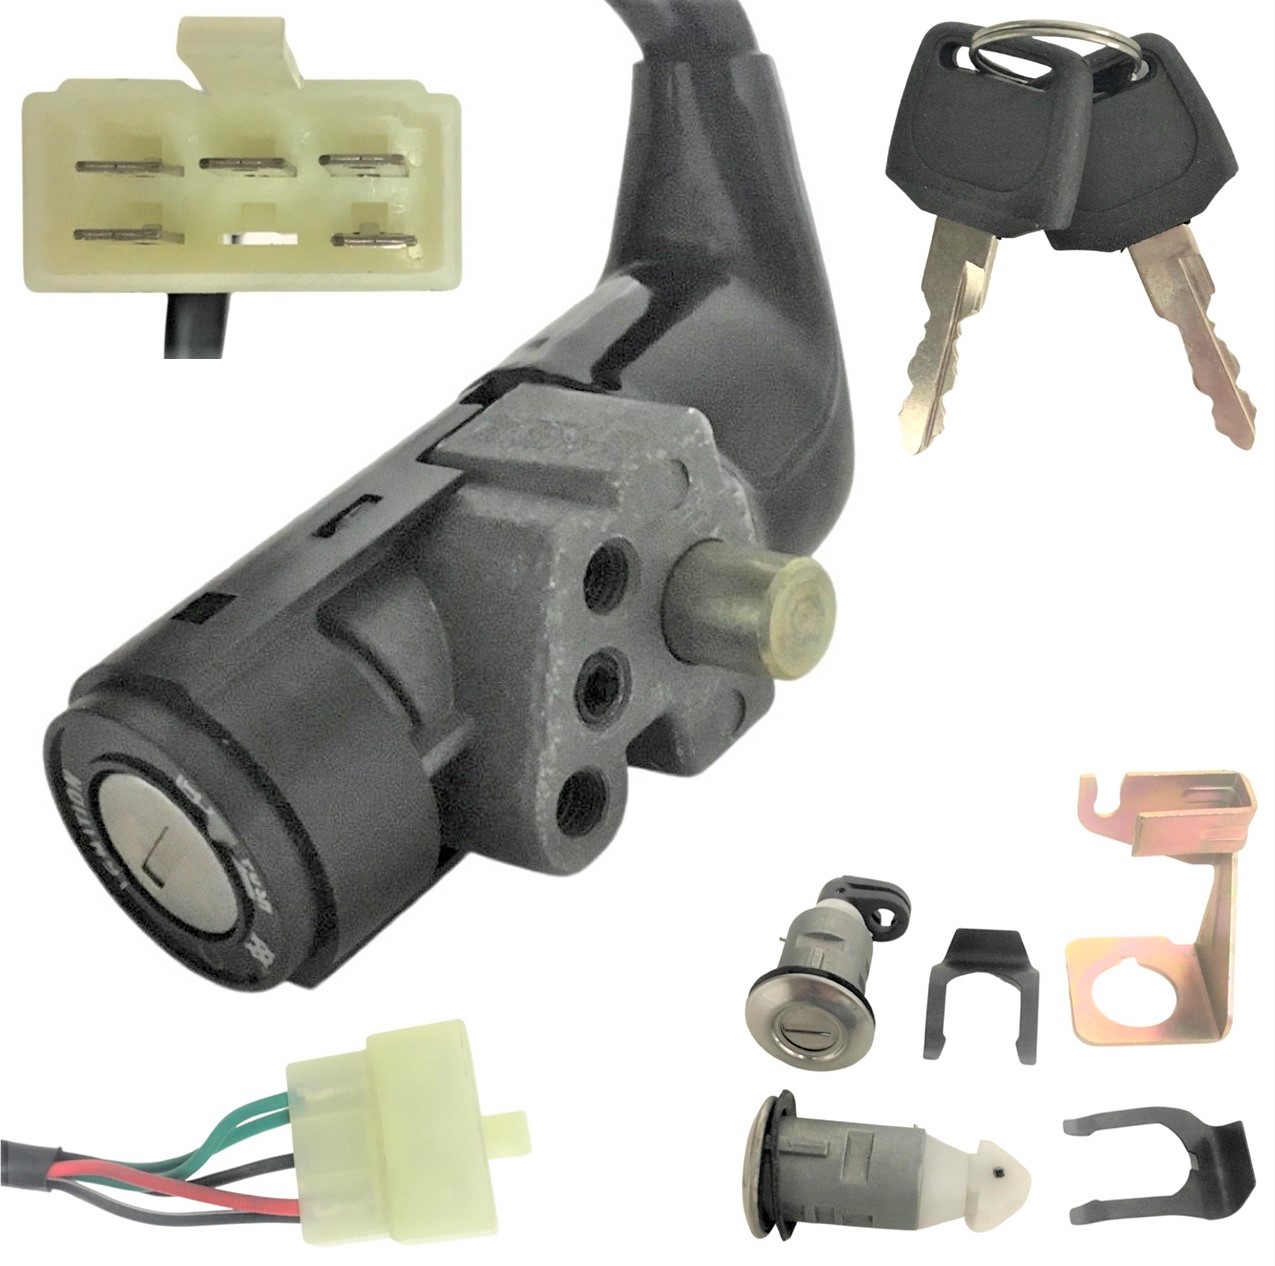 Ignition Switch Fits Many 50-150 Scooters With Seat and Trunk Lock 5 Pin in 6 Pin Female Jack Bolts c/c=18mm